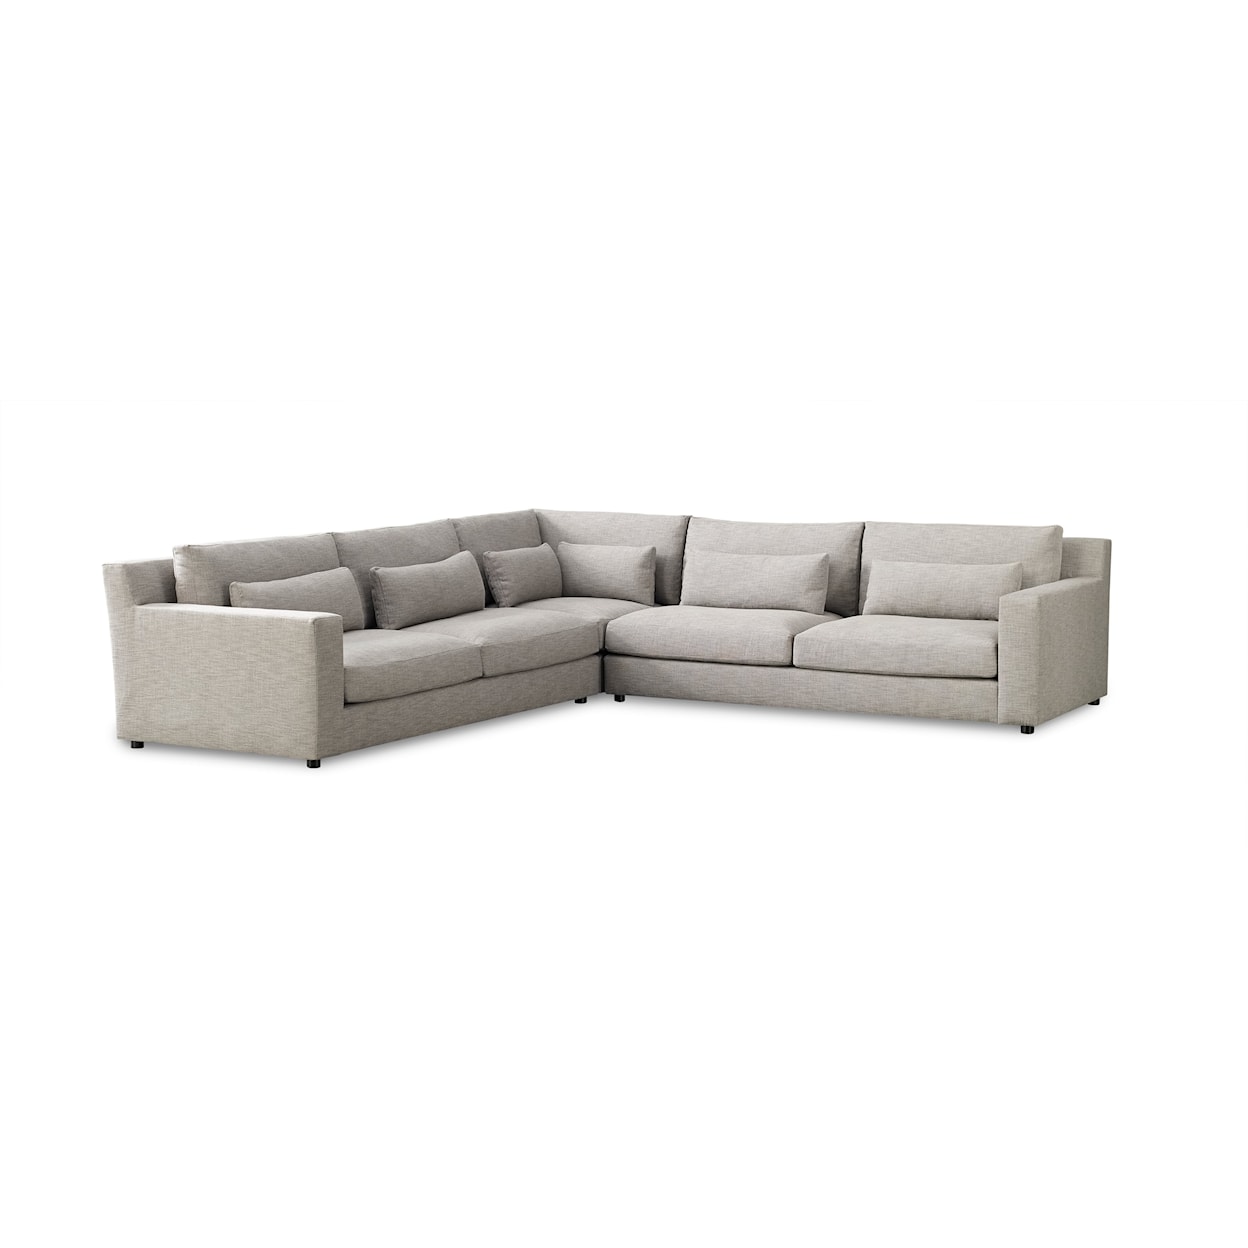 Huntington House 7200 Collection 3-Piece Sectional Loveseat